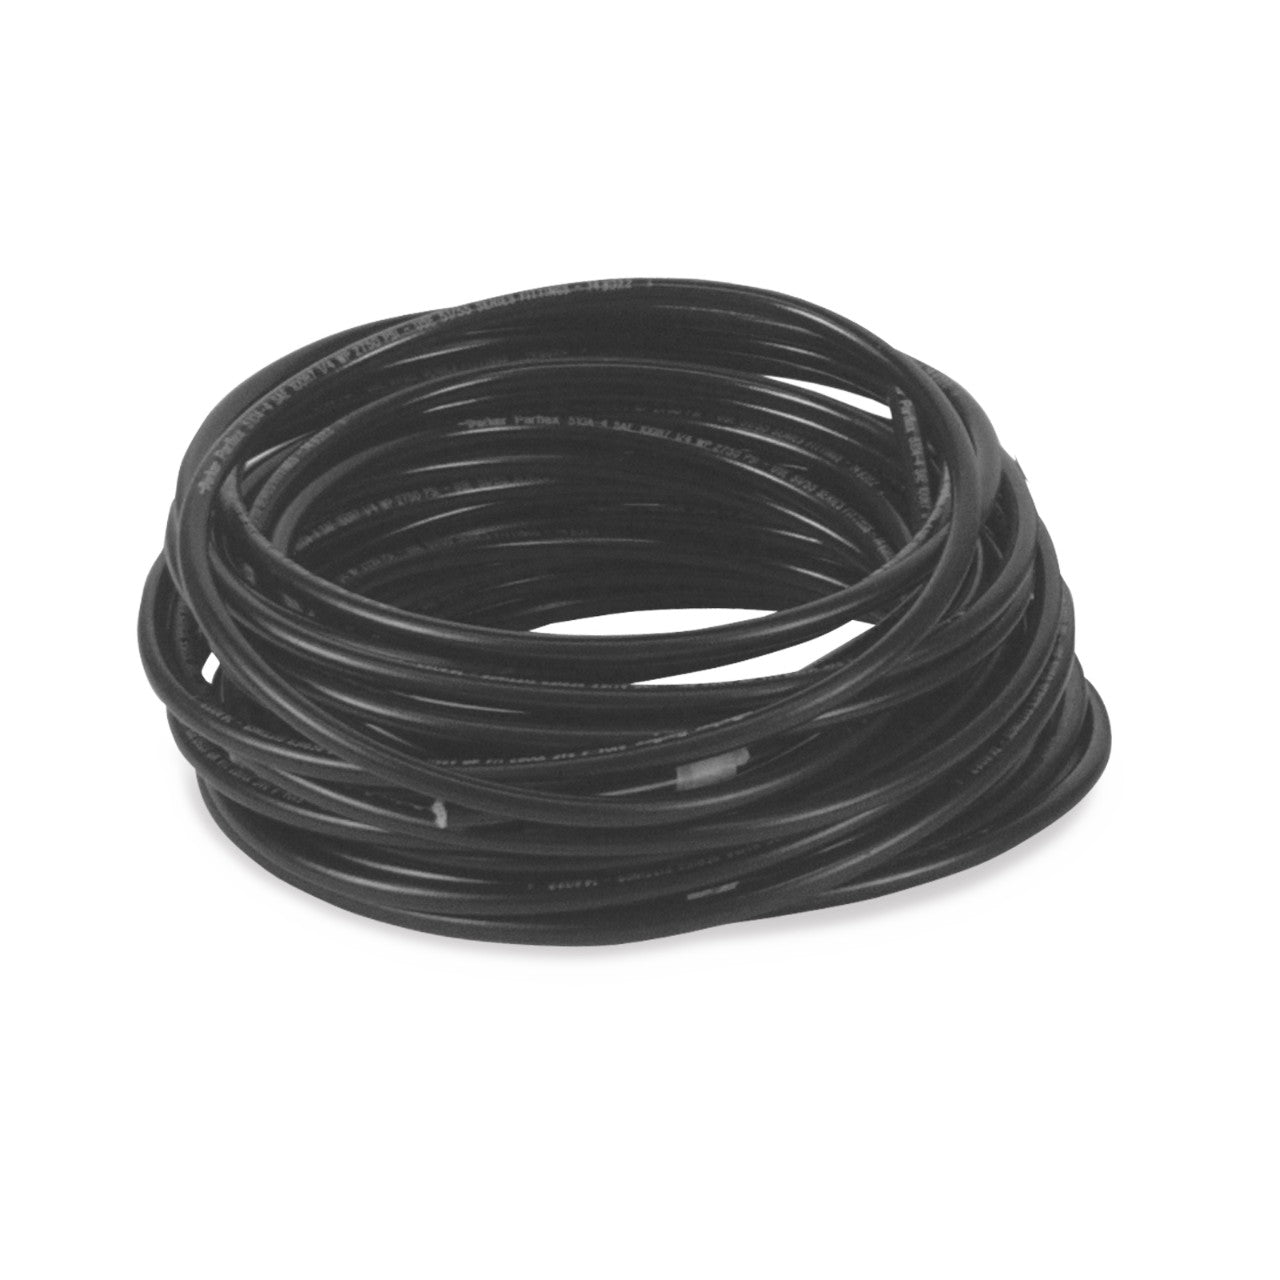 Hose, 1/8 in. ID, 3,000 PSI, 400 Feet, Braided with Polyurethane Cover